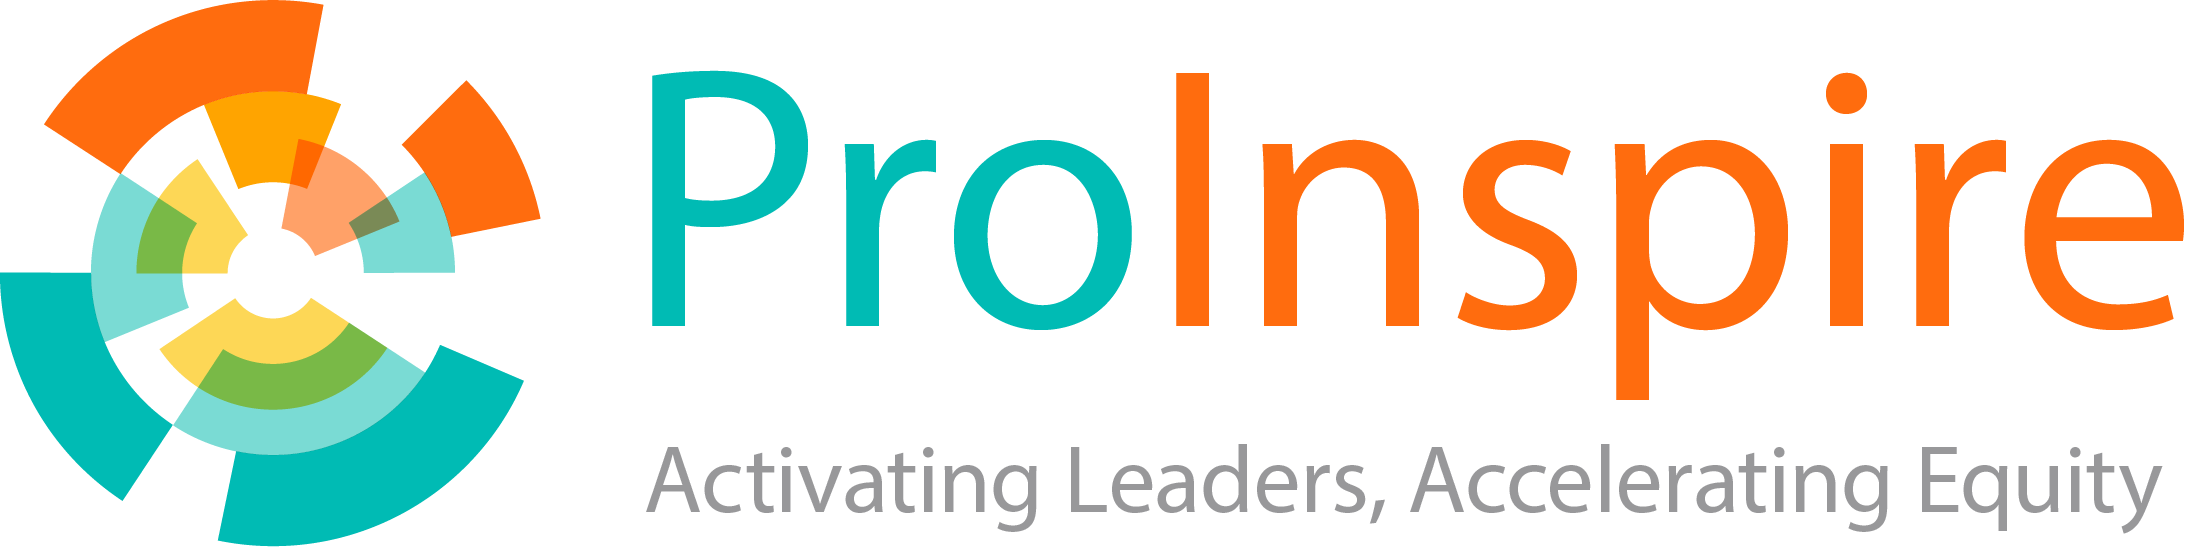 ProInspire - Activating Leaders, Accelerating Equity - logo